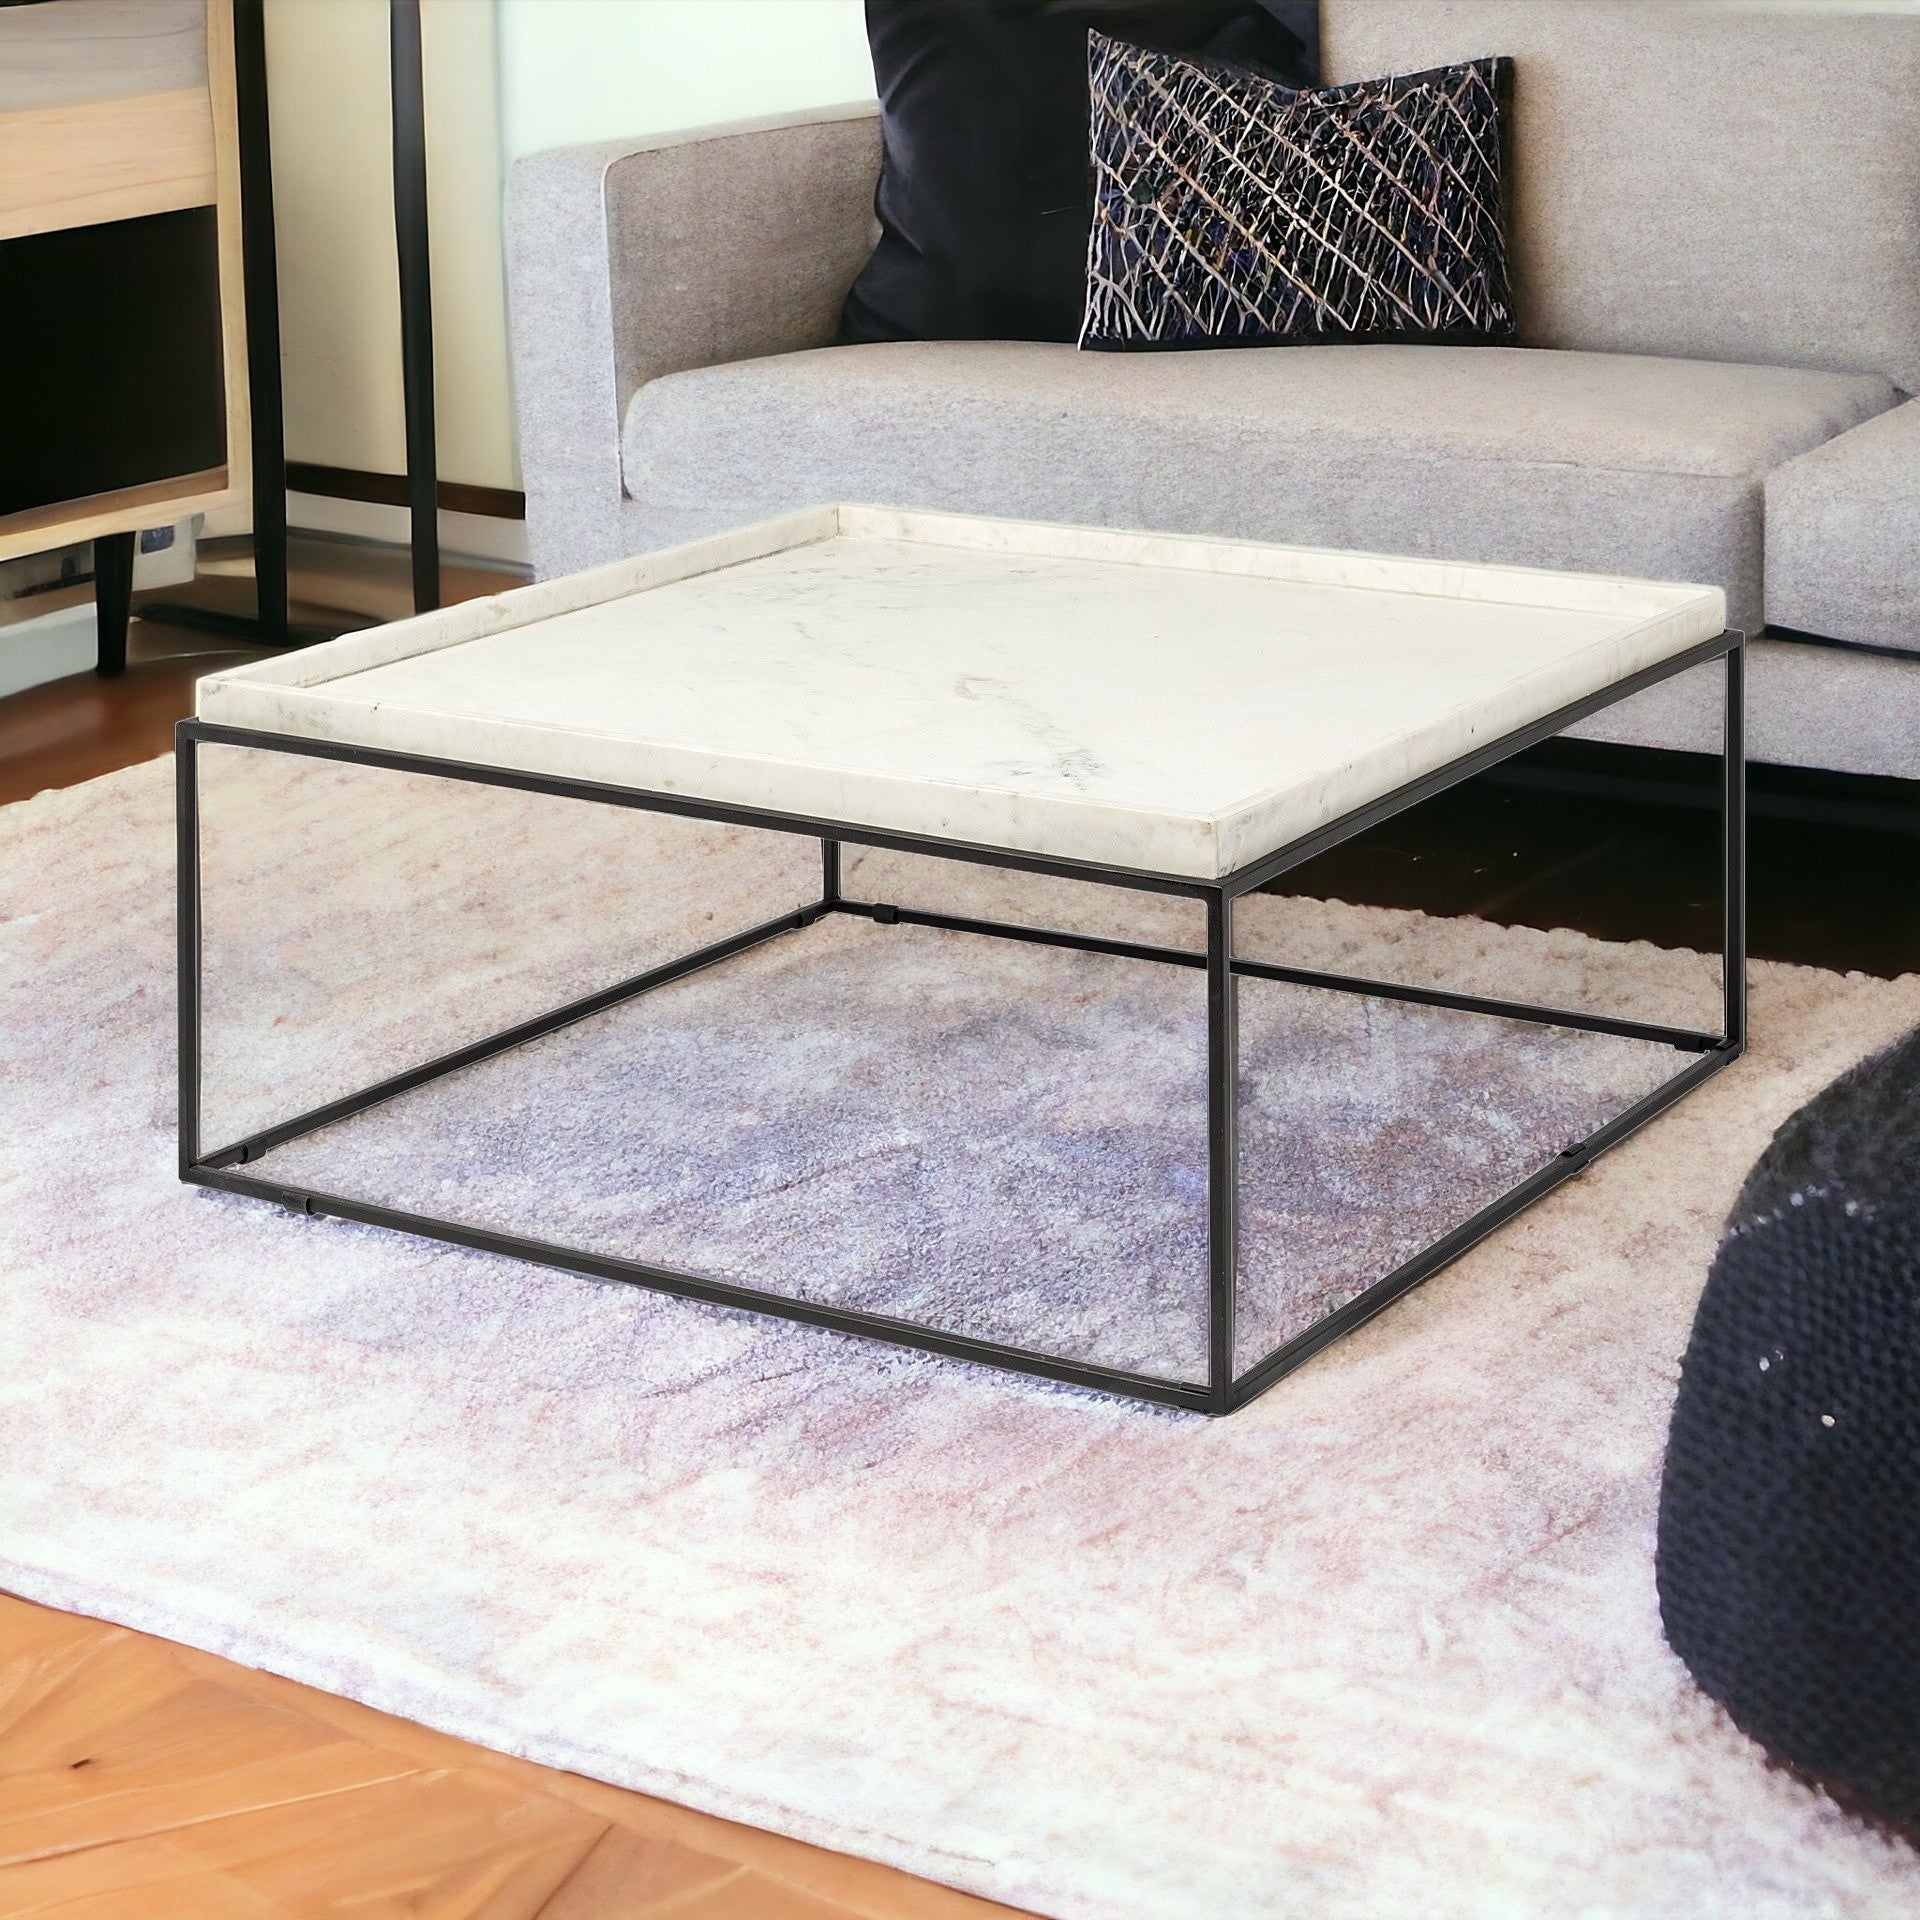 36" White And Black Genuine Marble And Metal Square Coffee Table